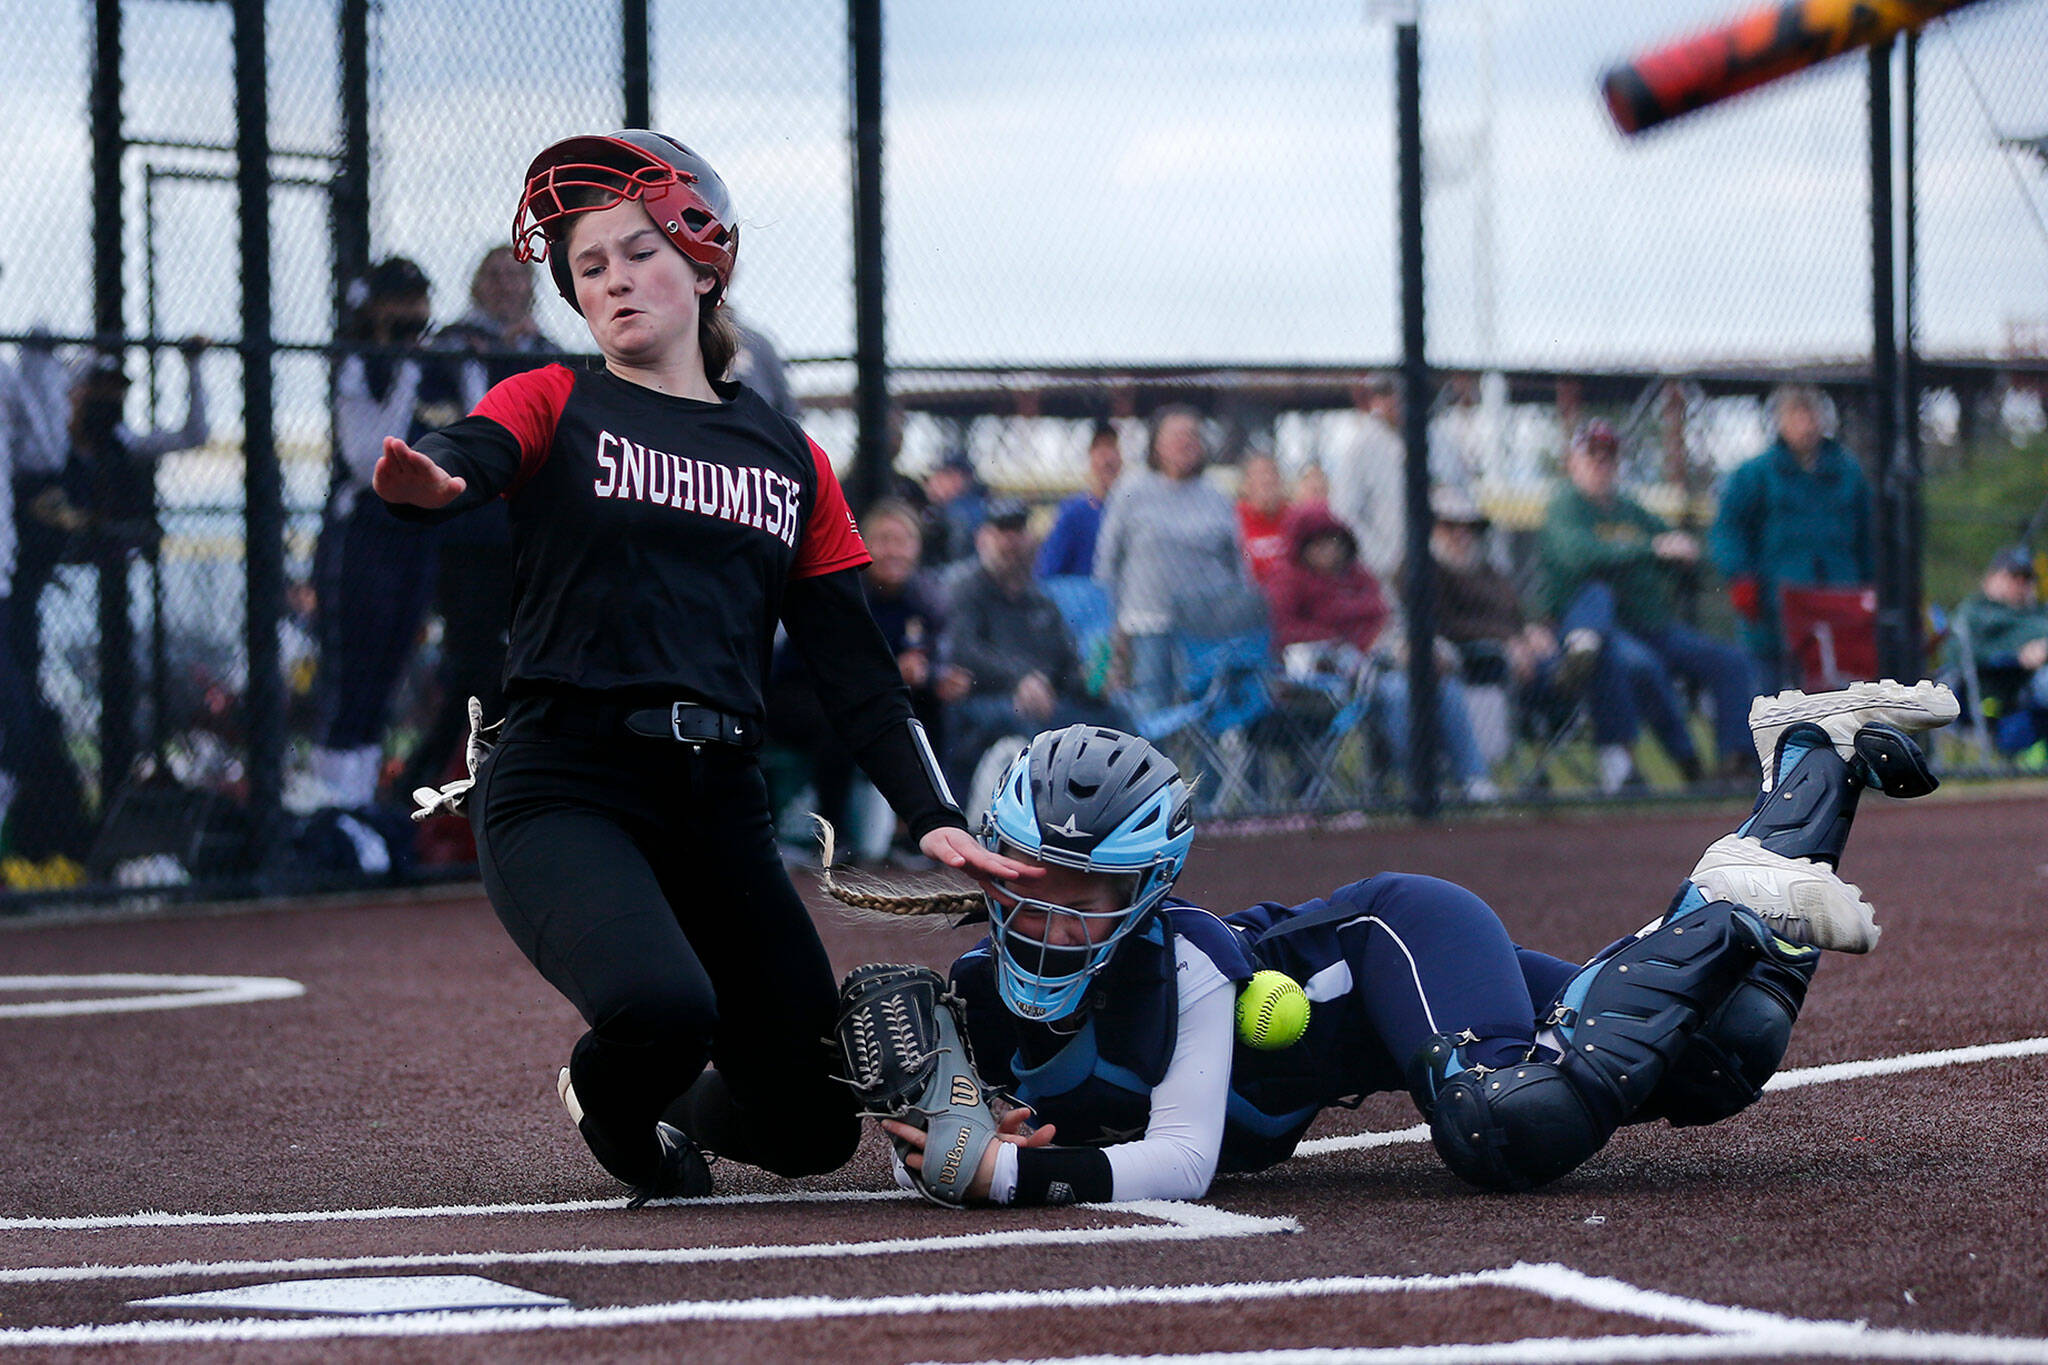 Snohomish’s Brynn VanBrunt collides with Everett catcher Maddie Pewitt before scoring on a sacrifice fly during Tuesday’s Class 3A District 1 matchup at the Phil Johnson Ballfields in Everett. (Ryan Berry / The Herald)